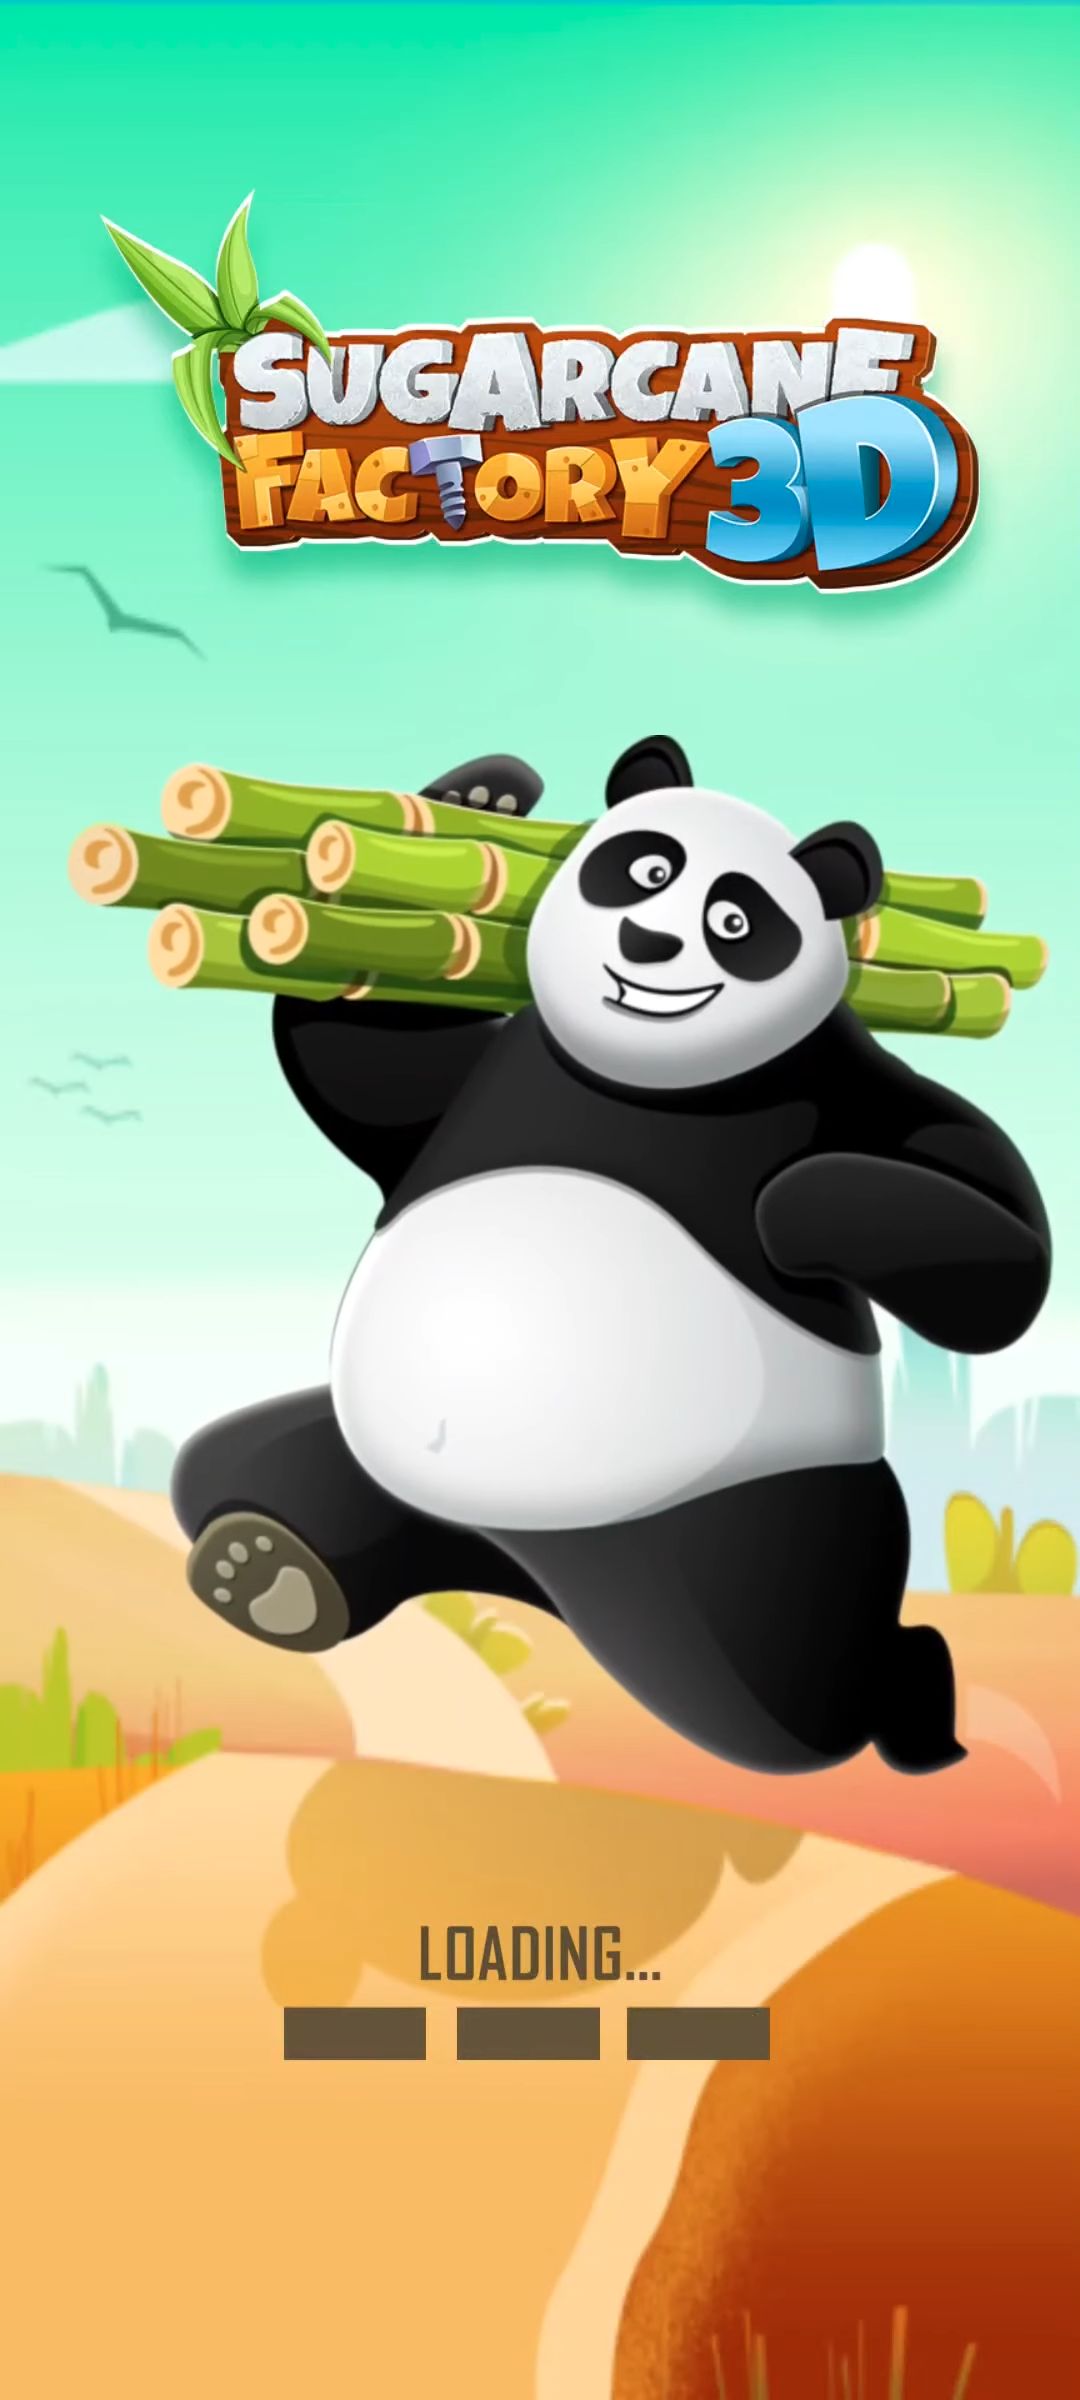 Download Sugarcane Inc. Empire Tycoon Android free game.